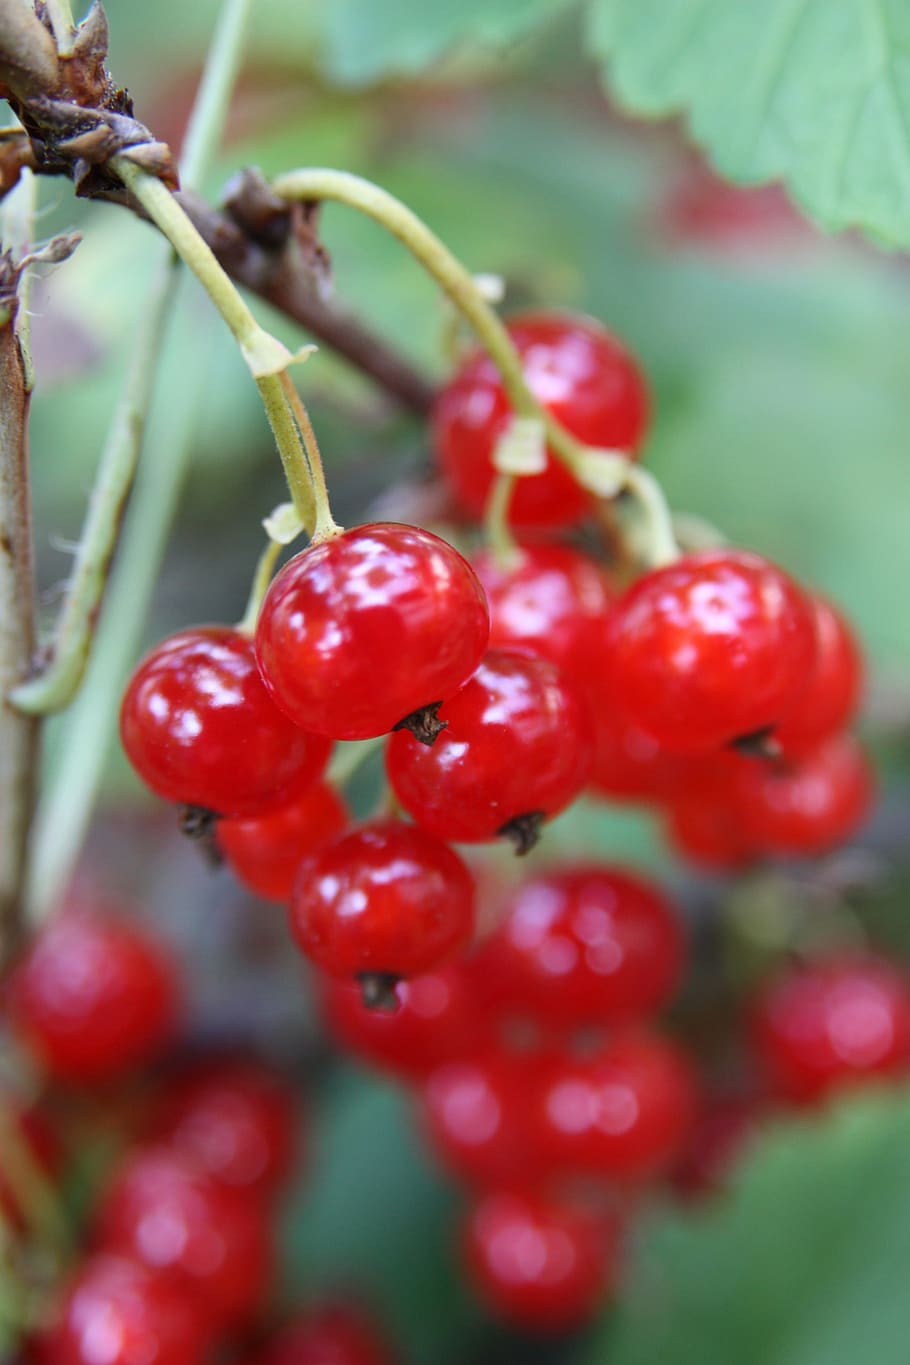 Red Currant, Garden, Fruit, currant, red, berries, fruits, food and drink, growth, close-up